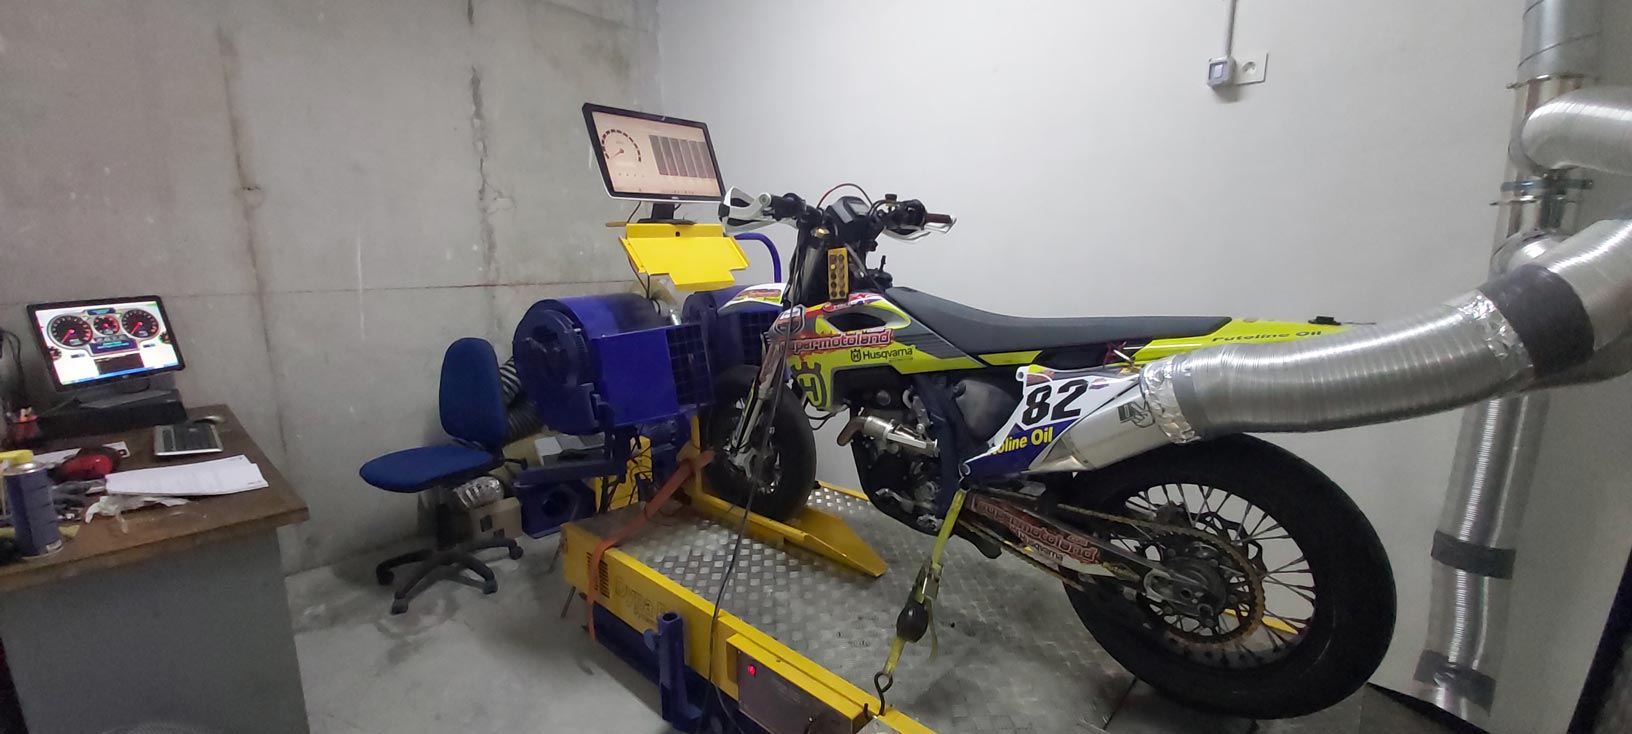 Supermoto Dyno Tuning and Workshop